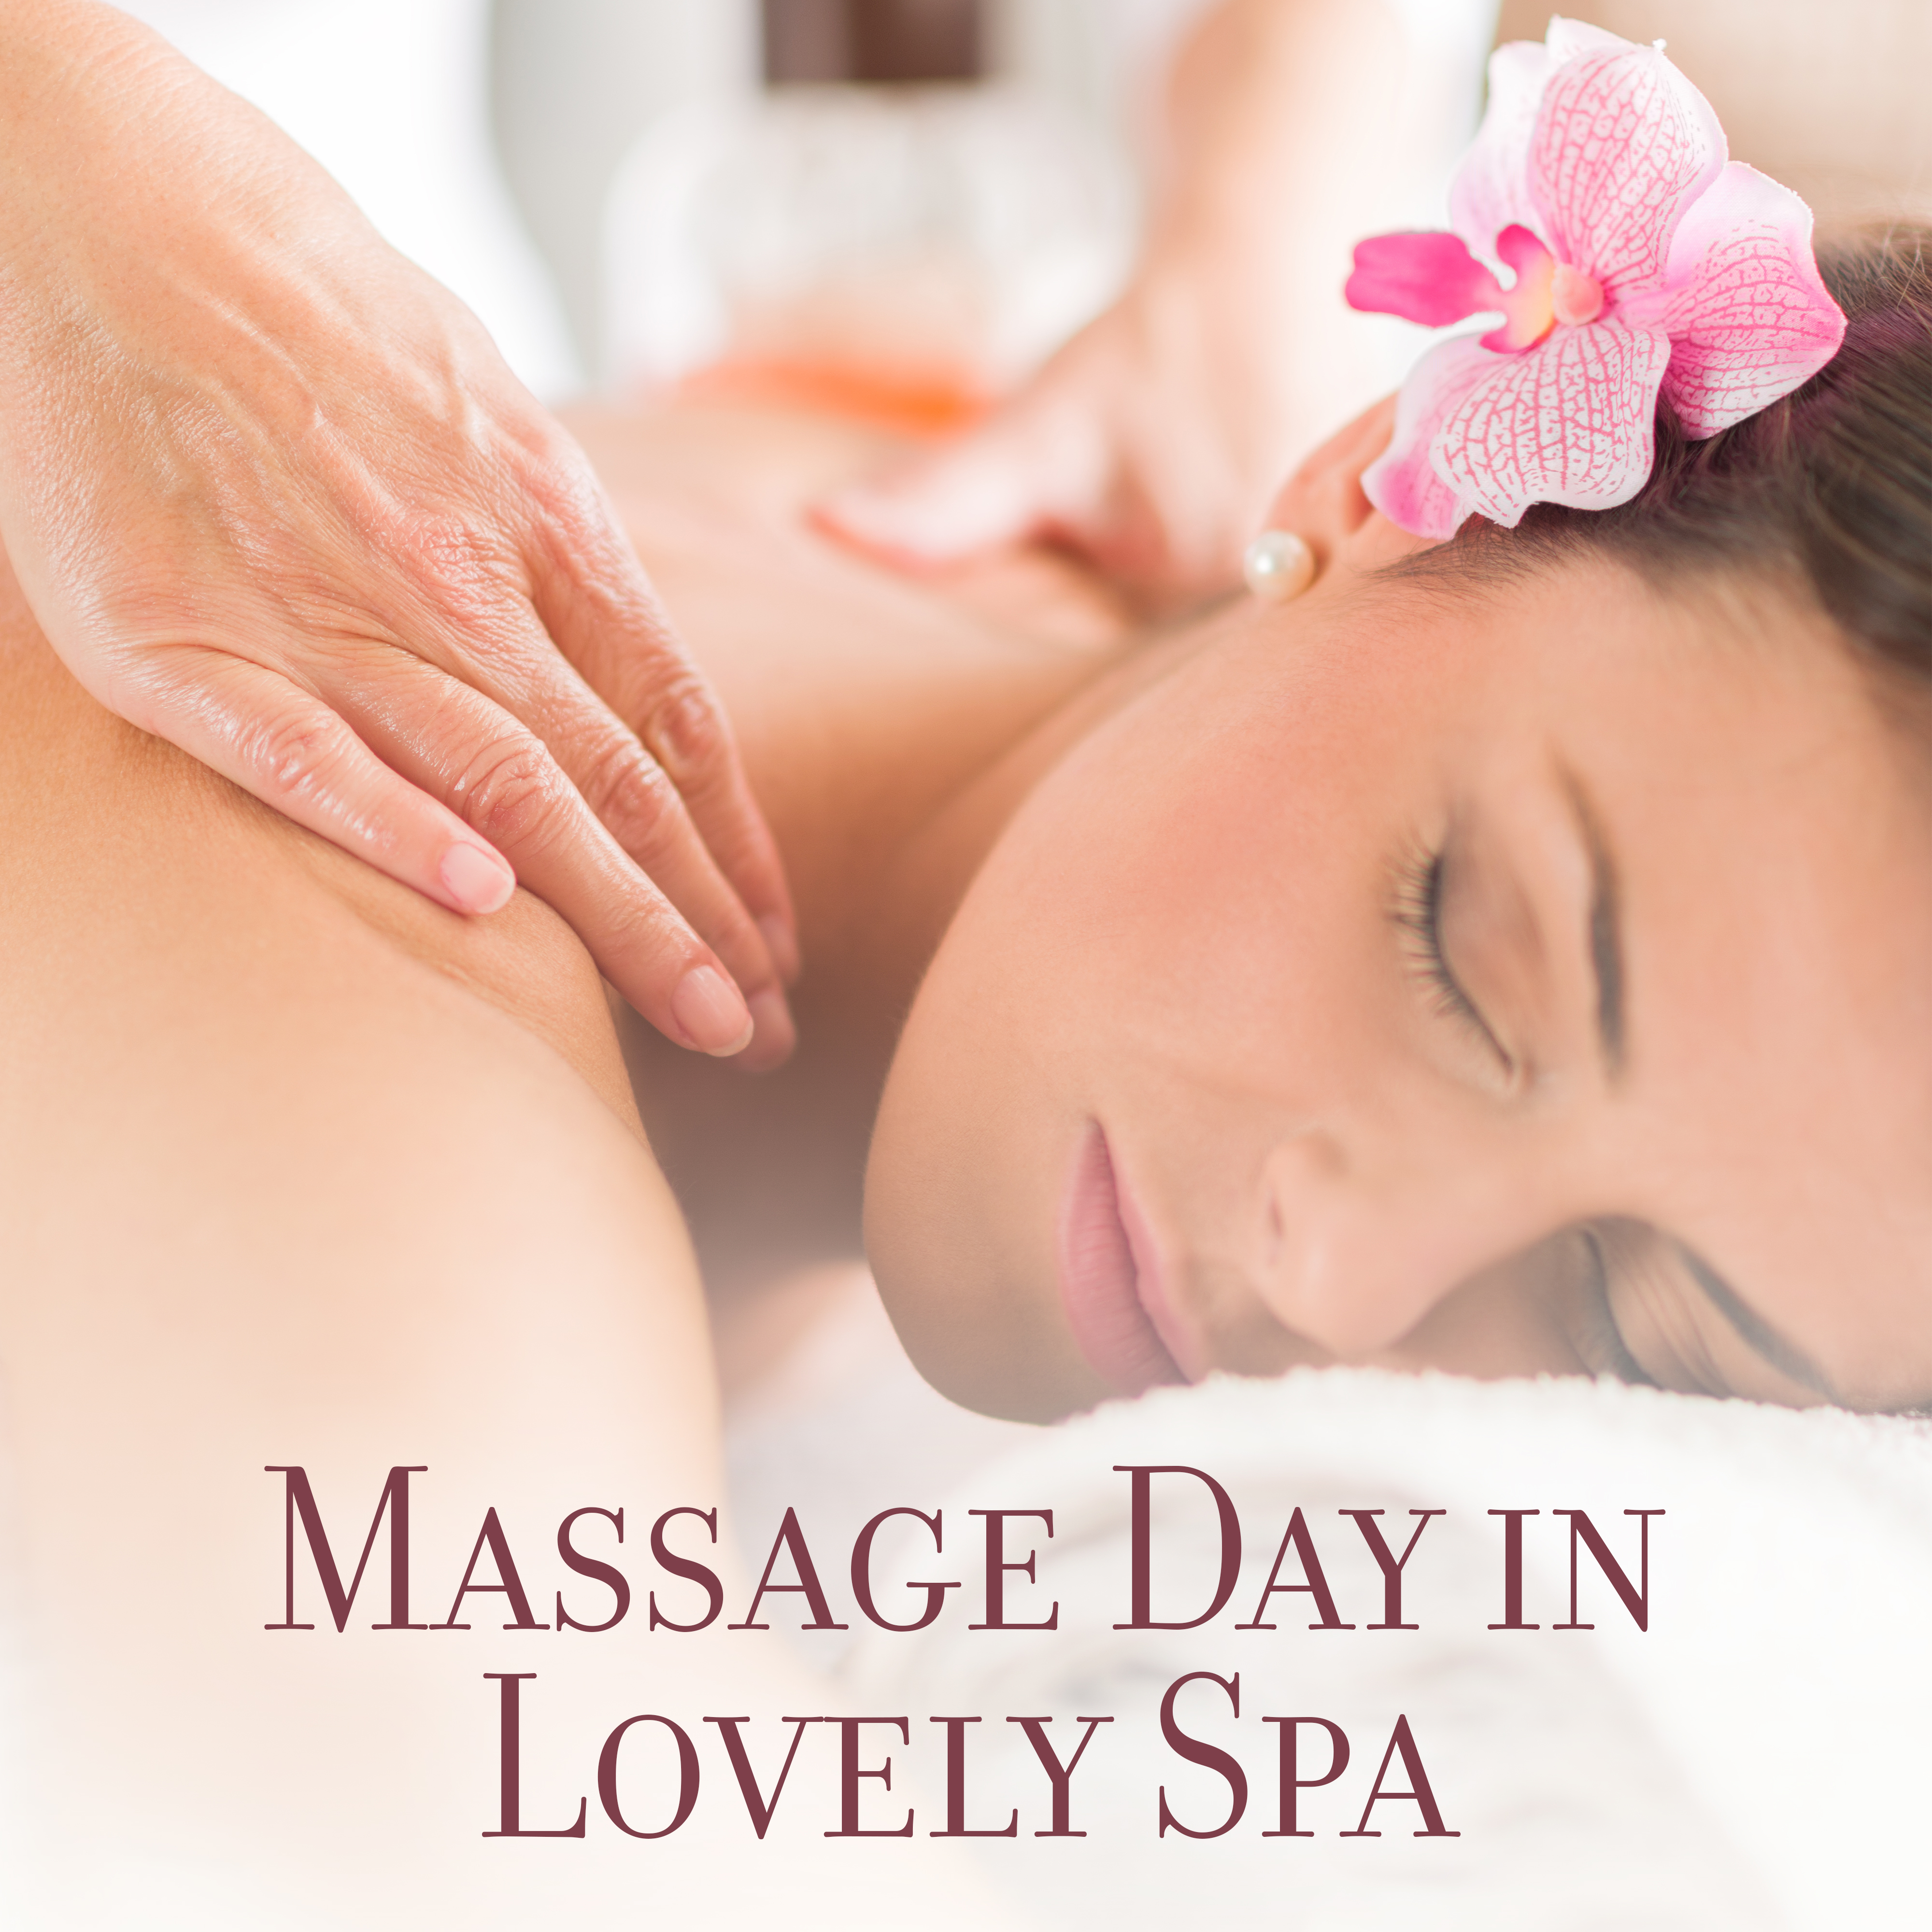 Massage Day in Lovely Spa – New Age Relaxing Spa & Wellness Music, Soft Atmosphere Sounds for Exotic Massage